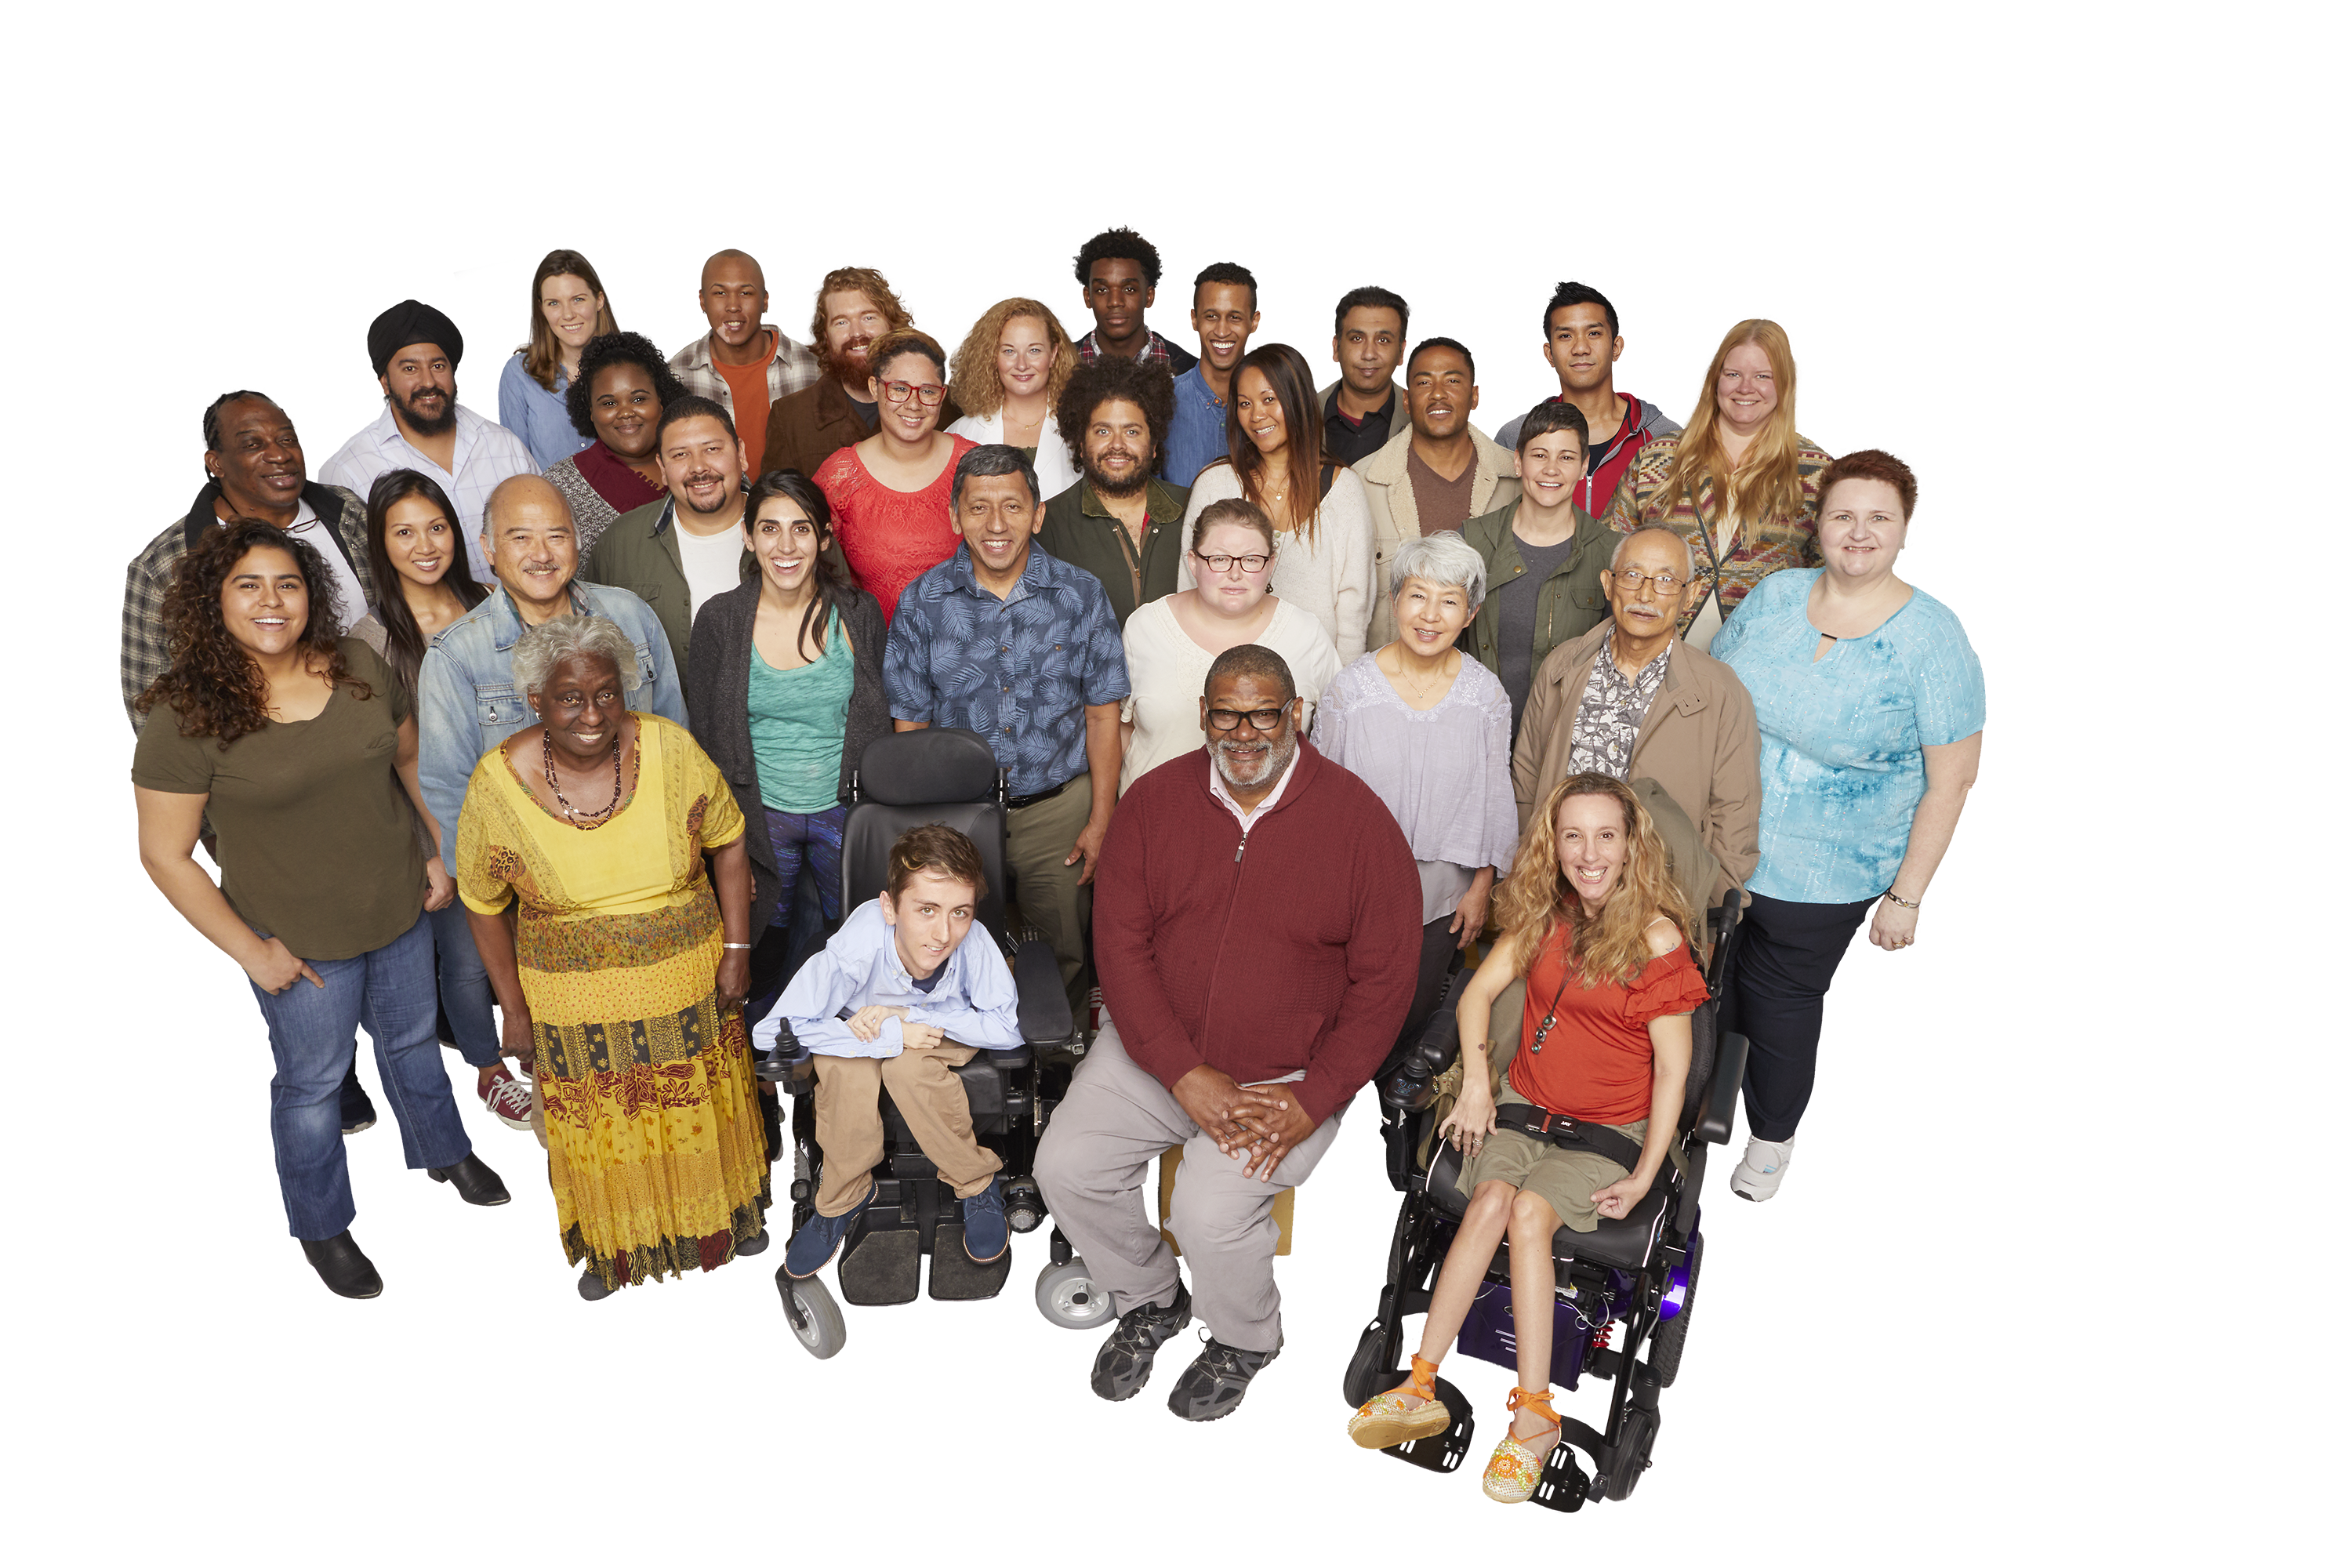 Diverse group of adults including people with disabilities